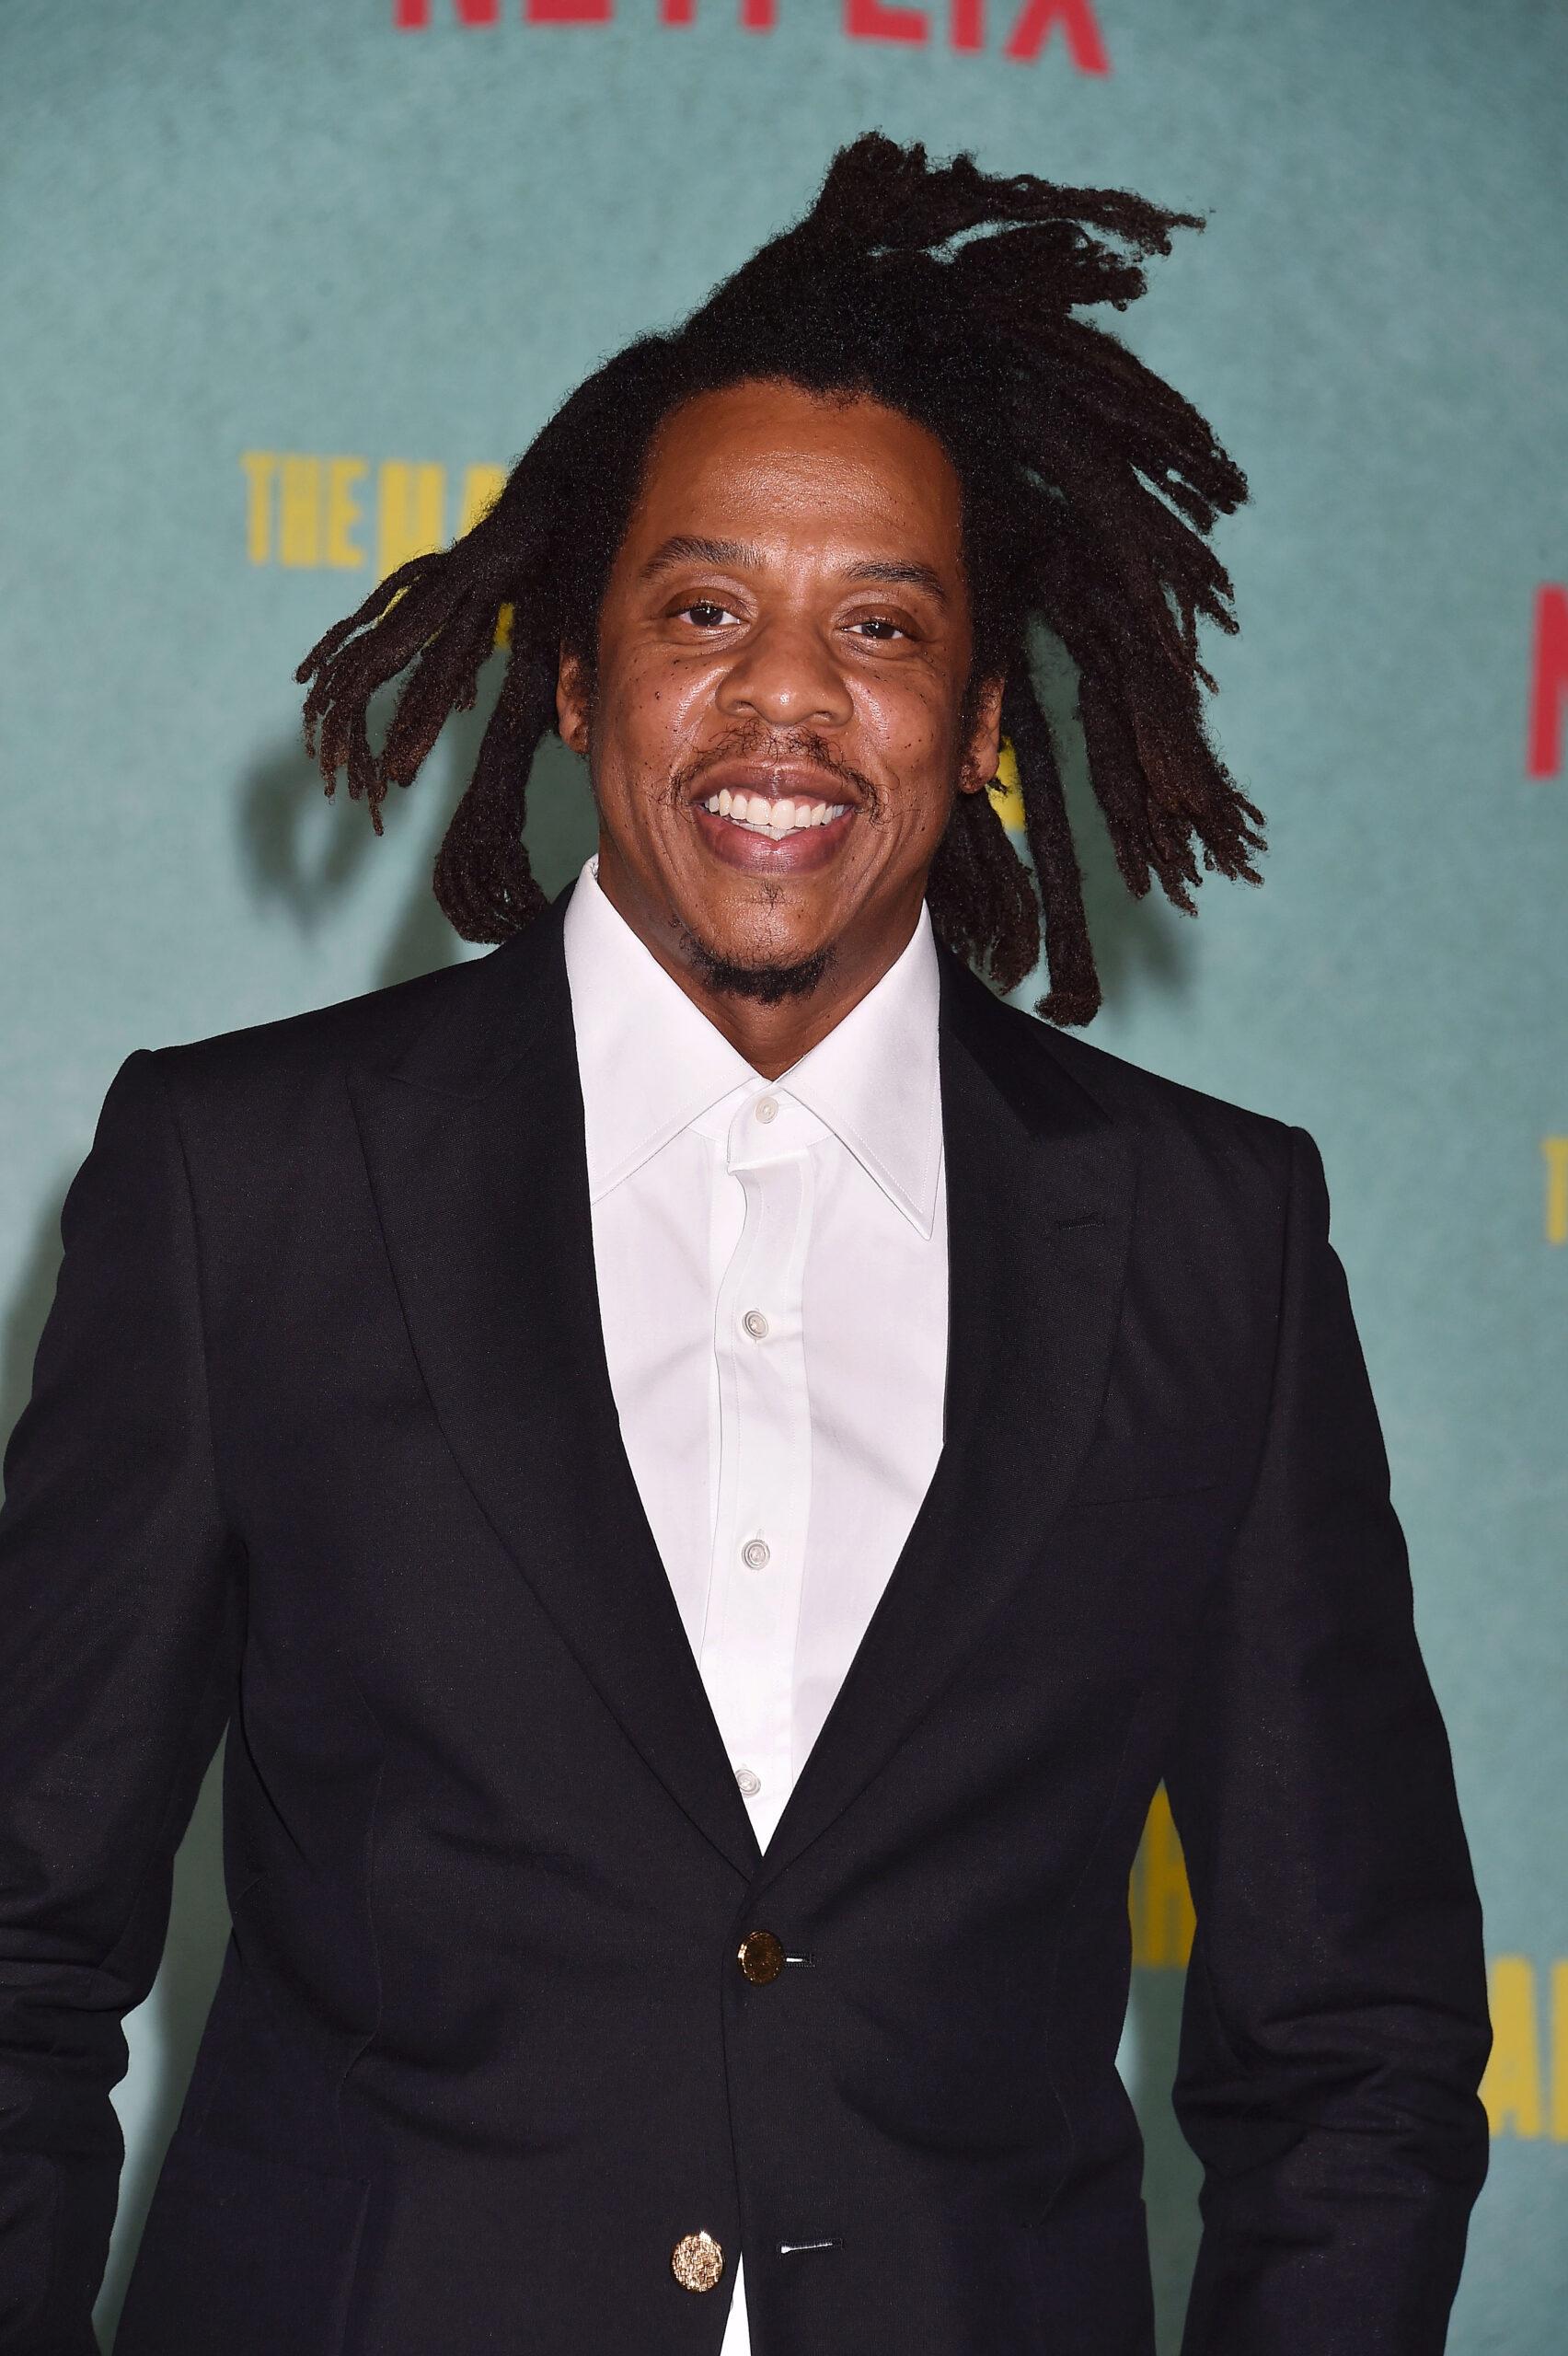 Jay-Z at Los Angeles Premiere Of "The Harder They Fall"